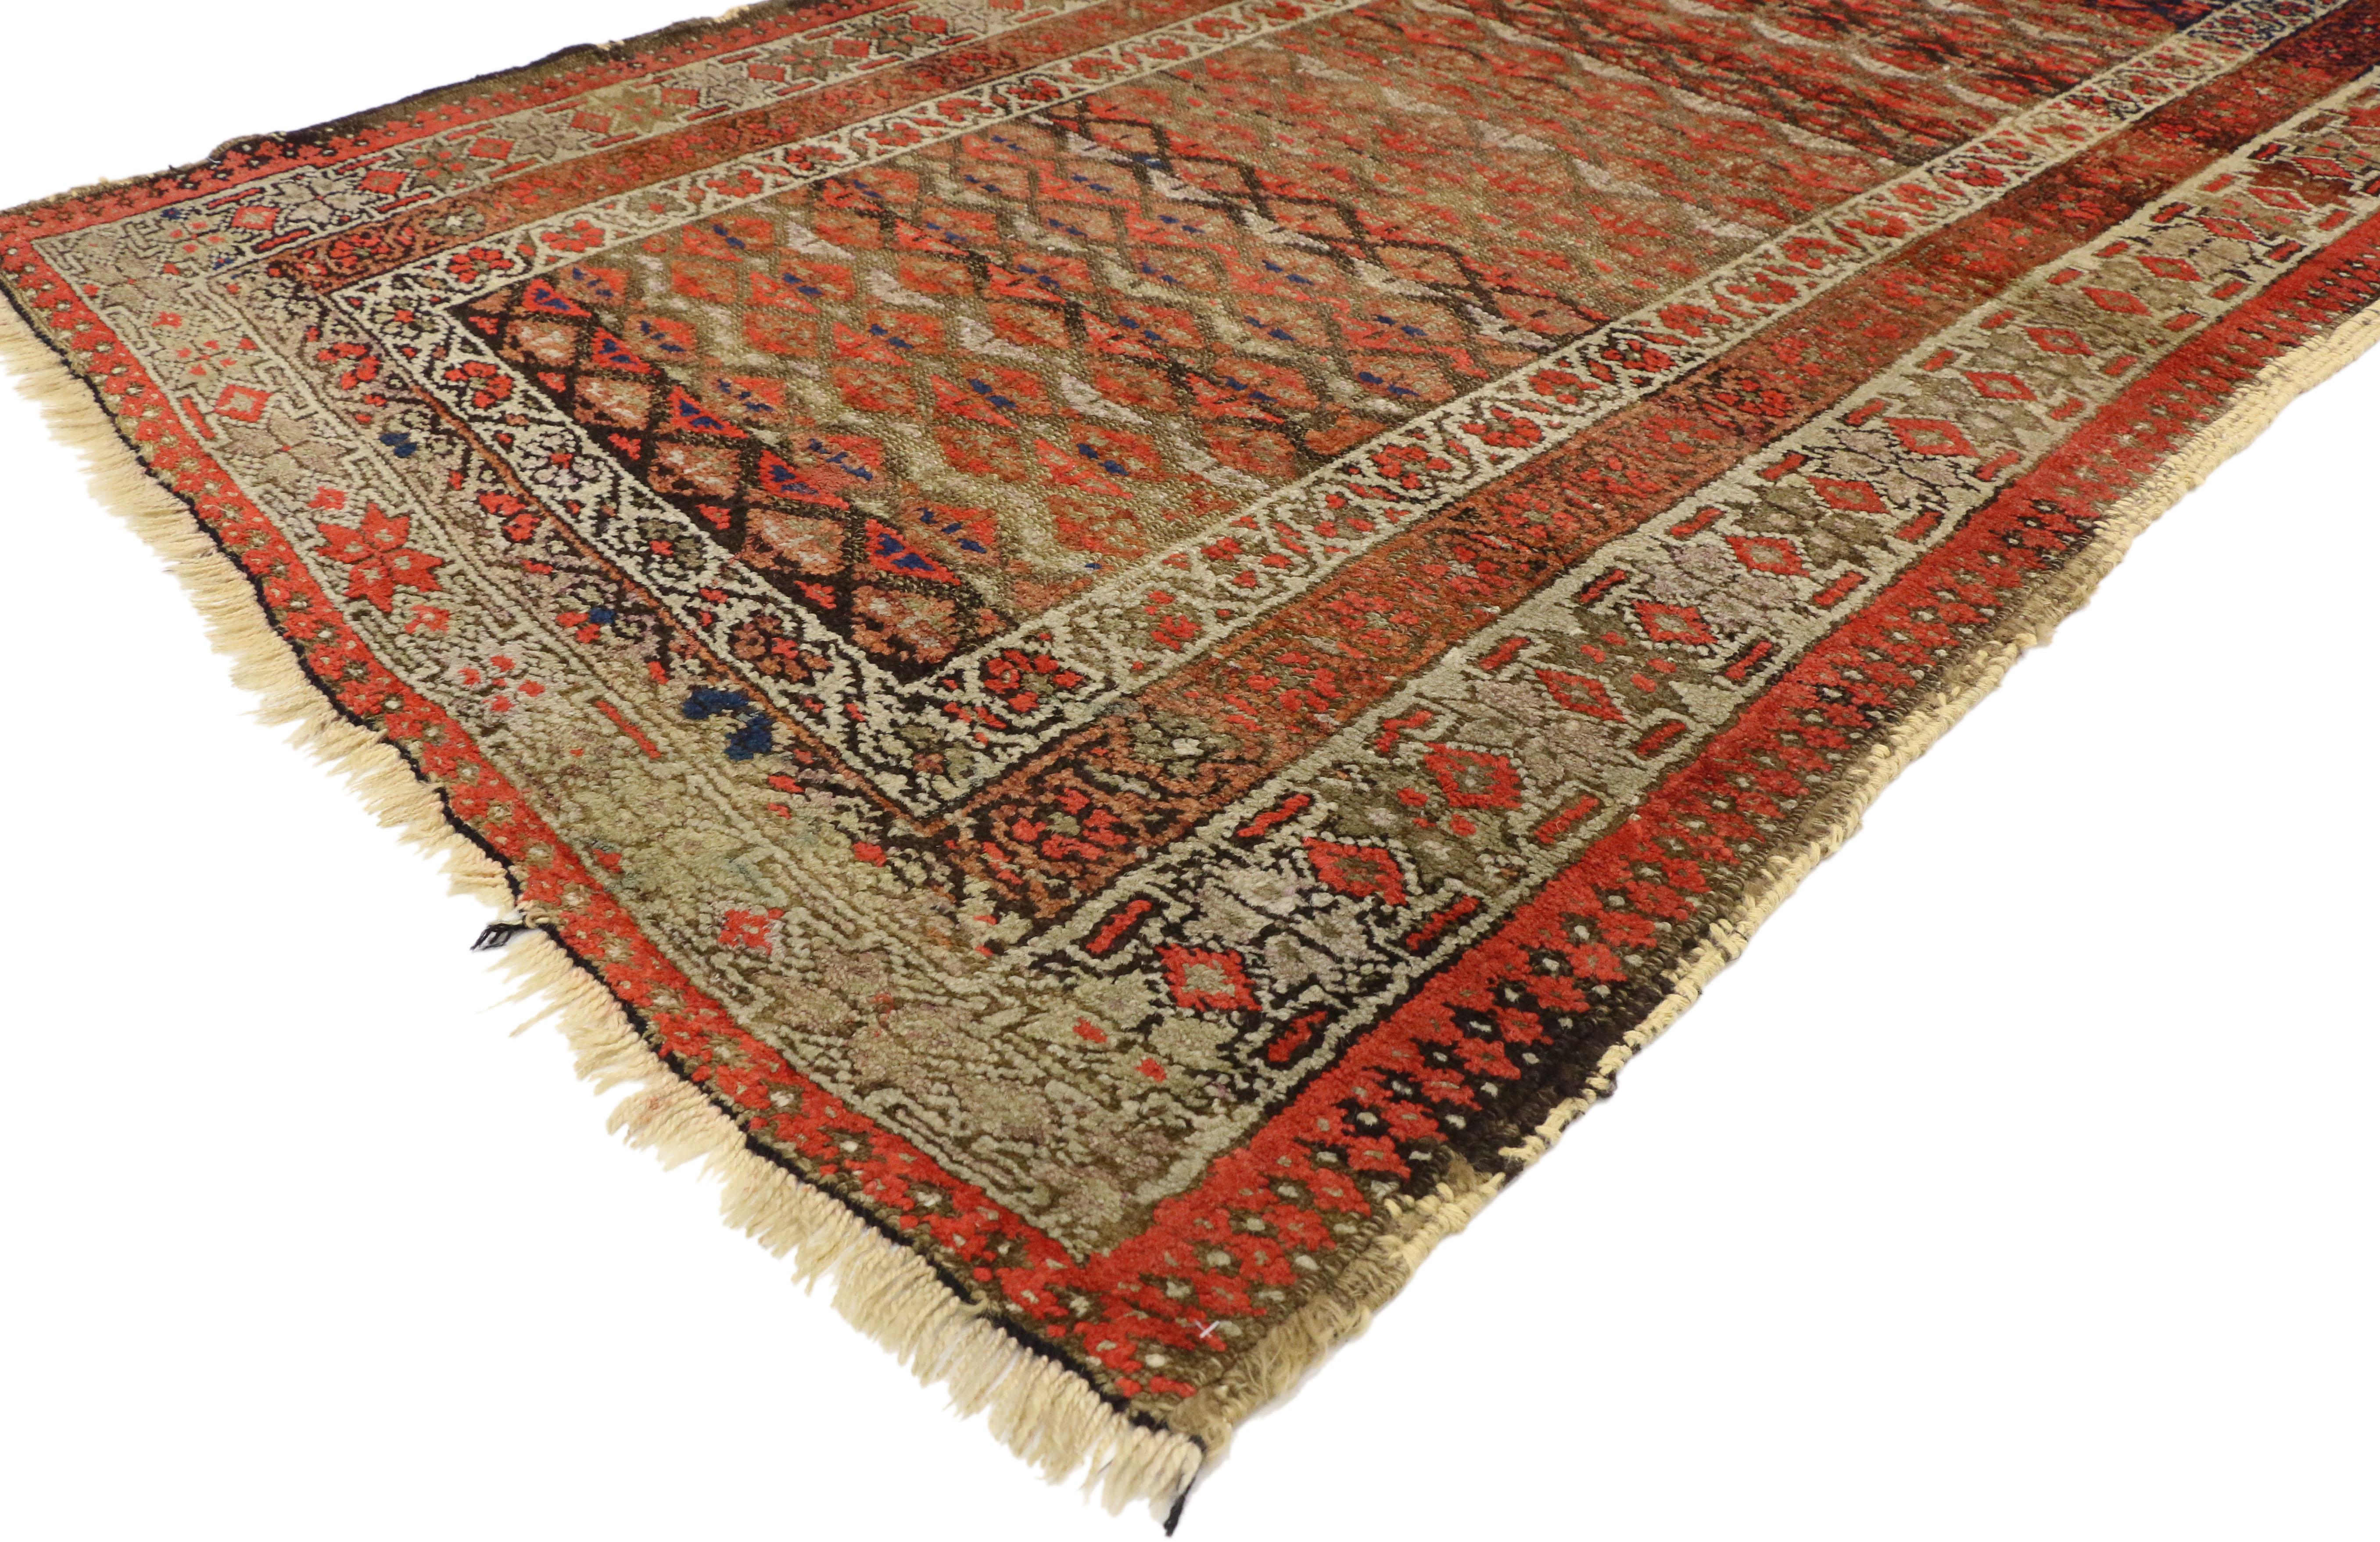 70981 Antique Persian Sarab Rug with Rustic Artisan Style 03'08 x 06'01. This hand-knotted Antique Persian Sarab Rug features an all-over geometric pattern composed of boteh motifs in bright orange red against a variegated abrash backdrop in sand